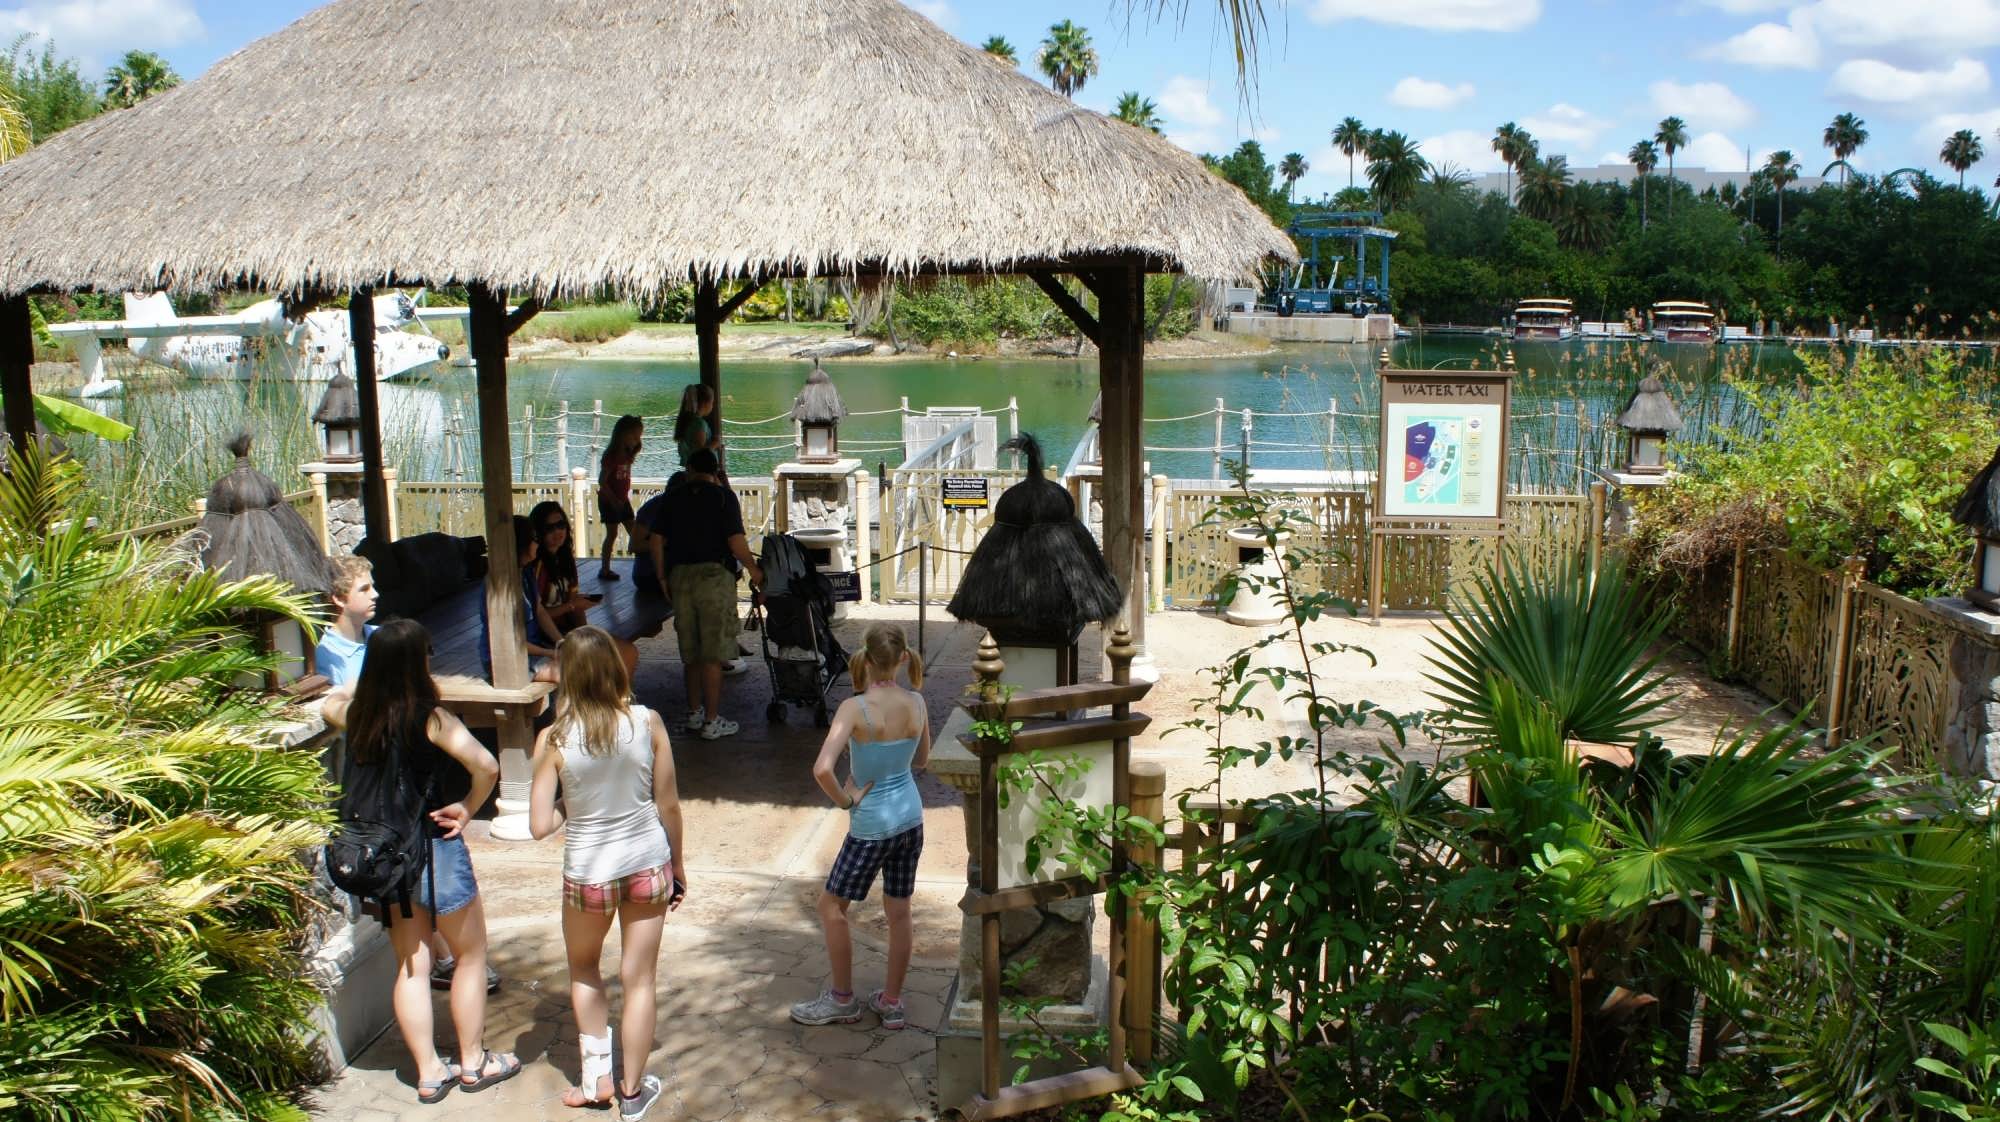 A thatched roof provides shade for guests on the water taxi dock at Royal Pacific Resort